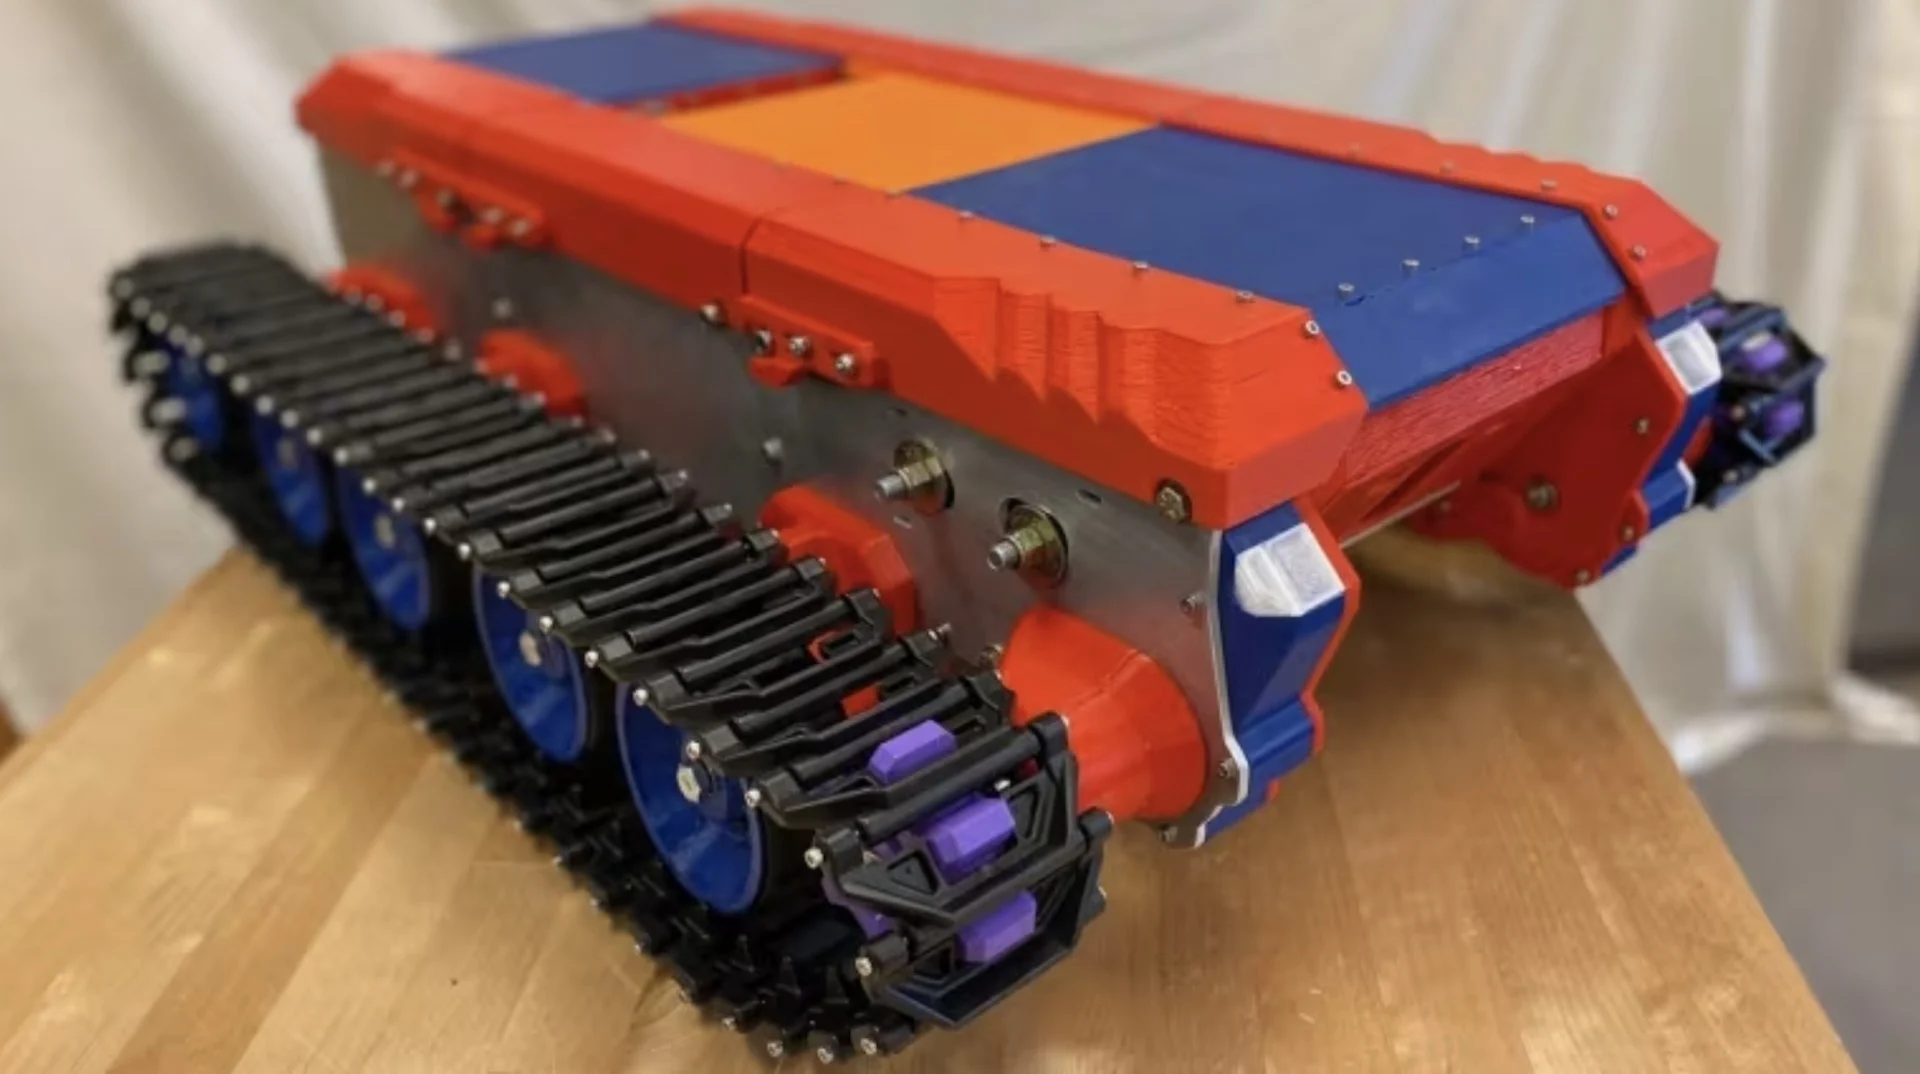 This snowbot is coming to help plow the Rideau Canal skateway